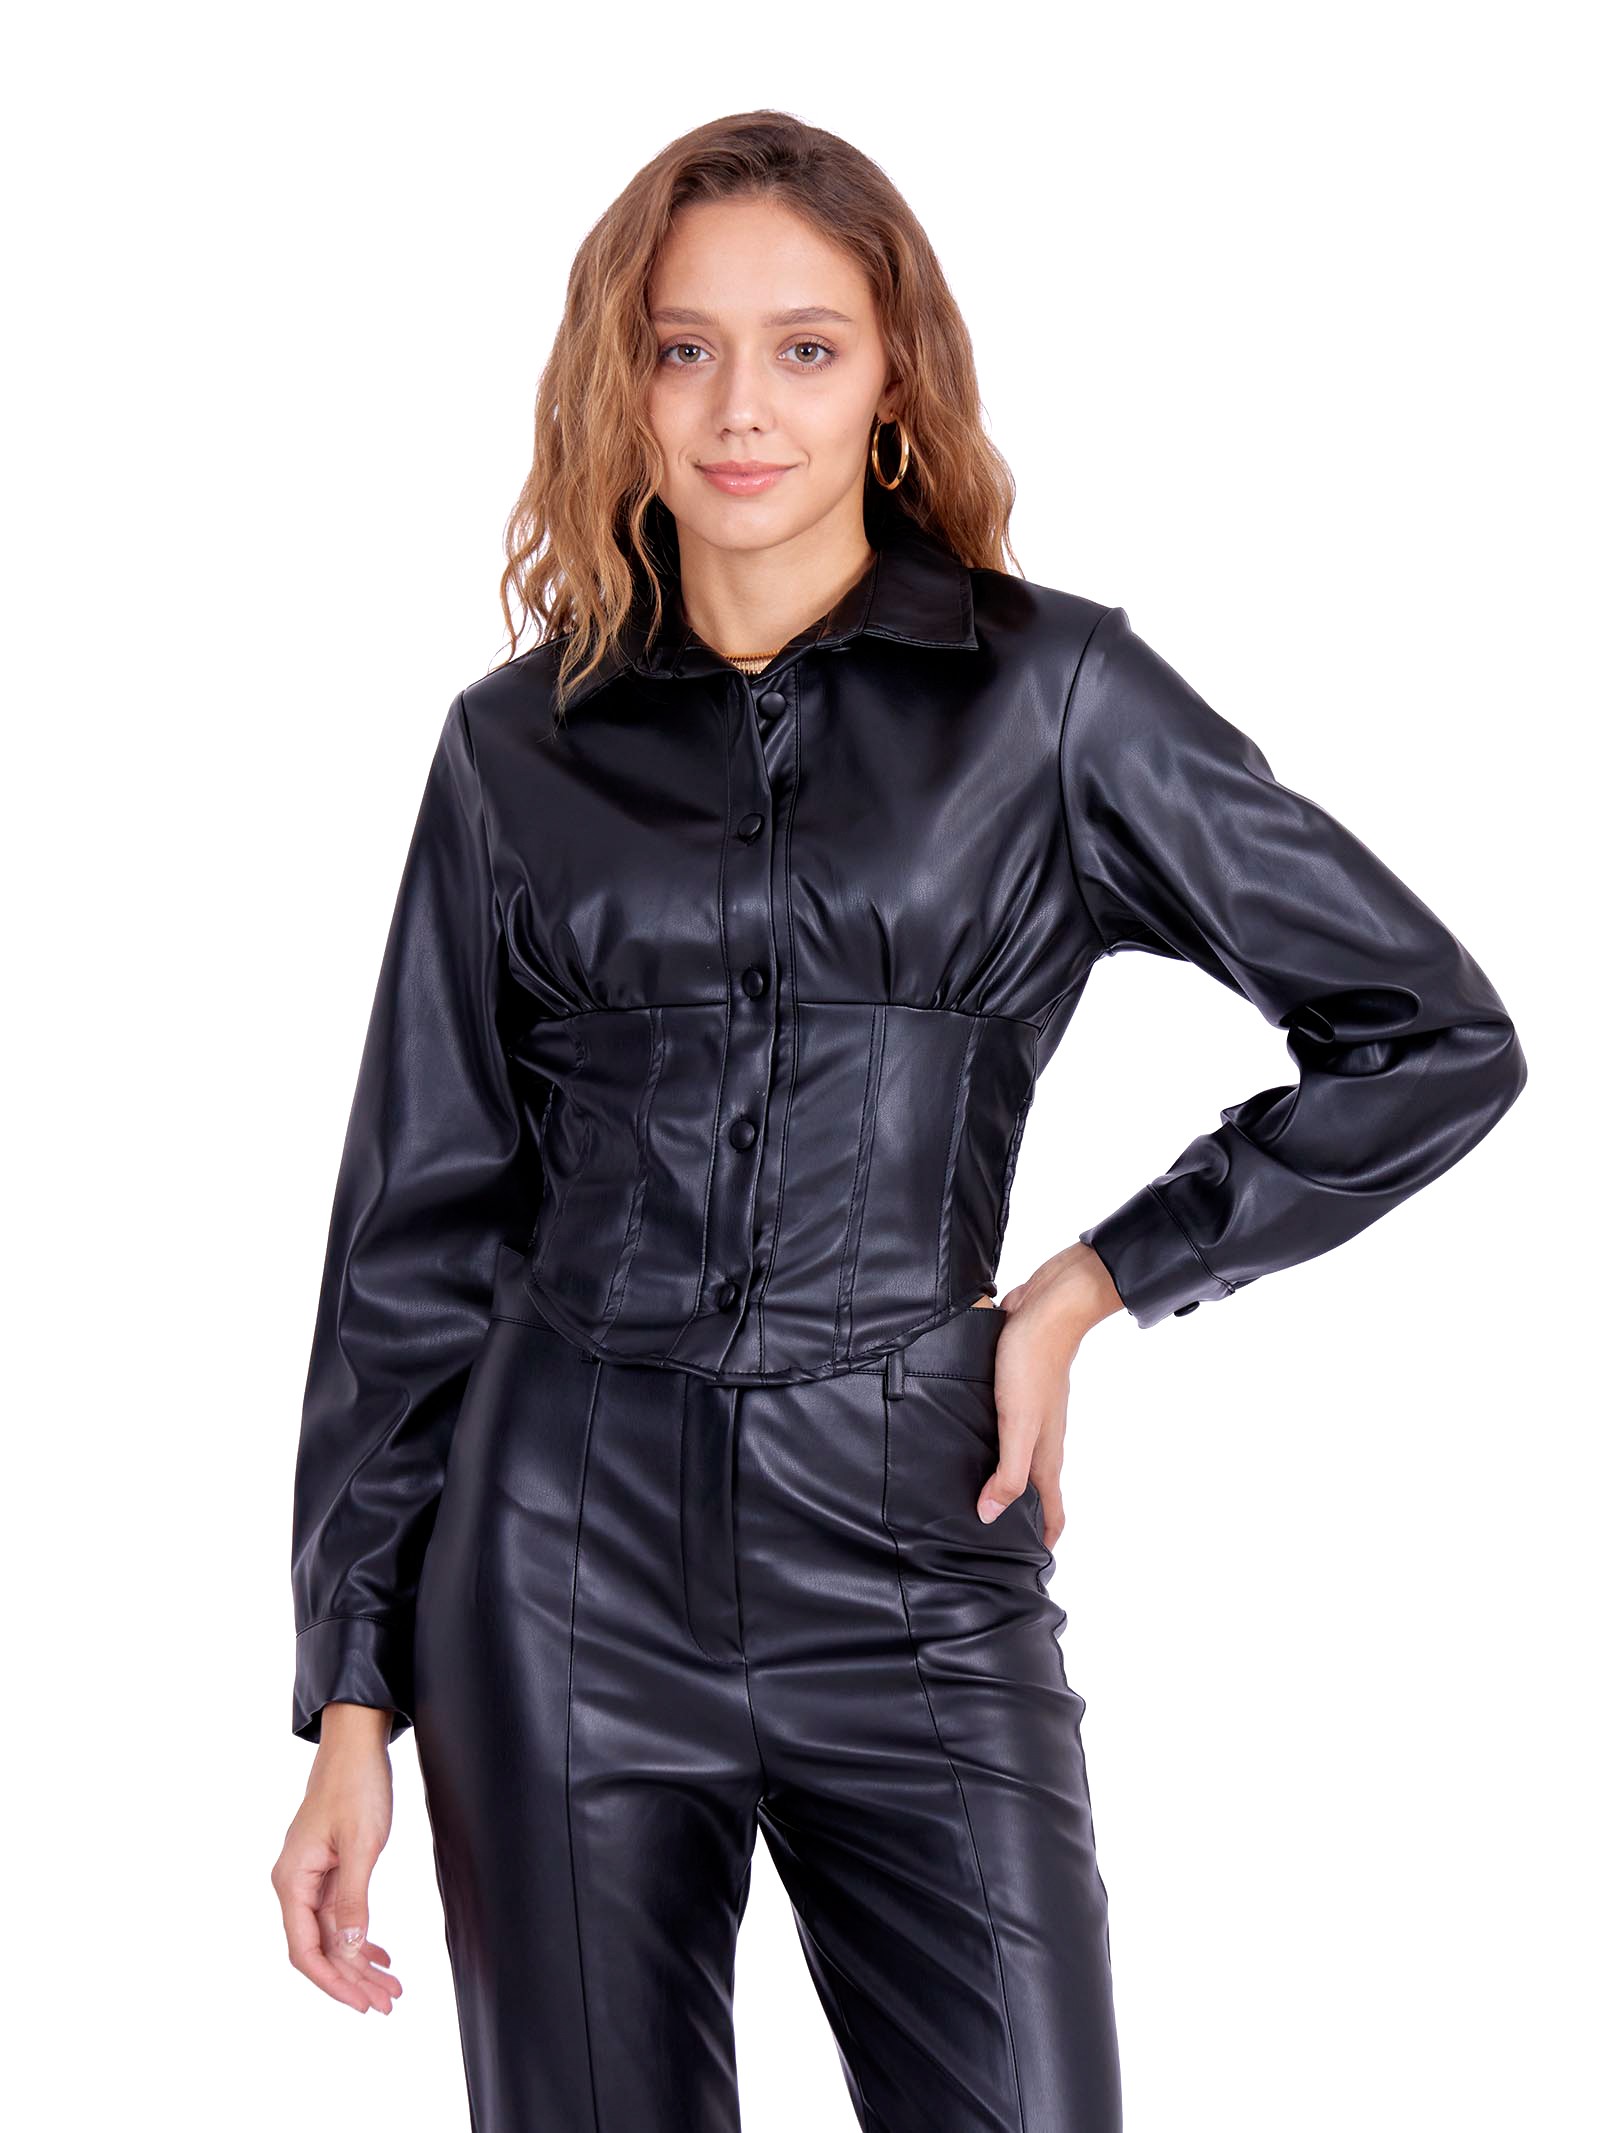  Faux leather crop Shirt with corset imitation 